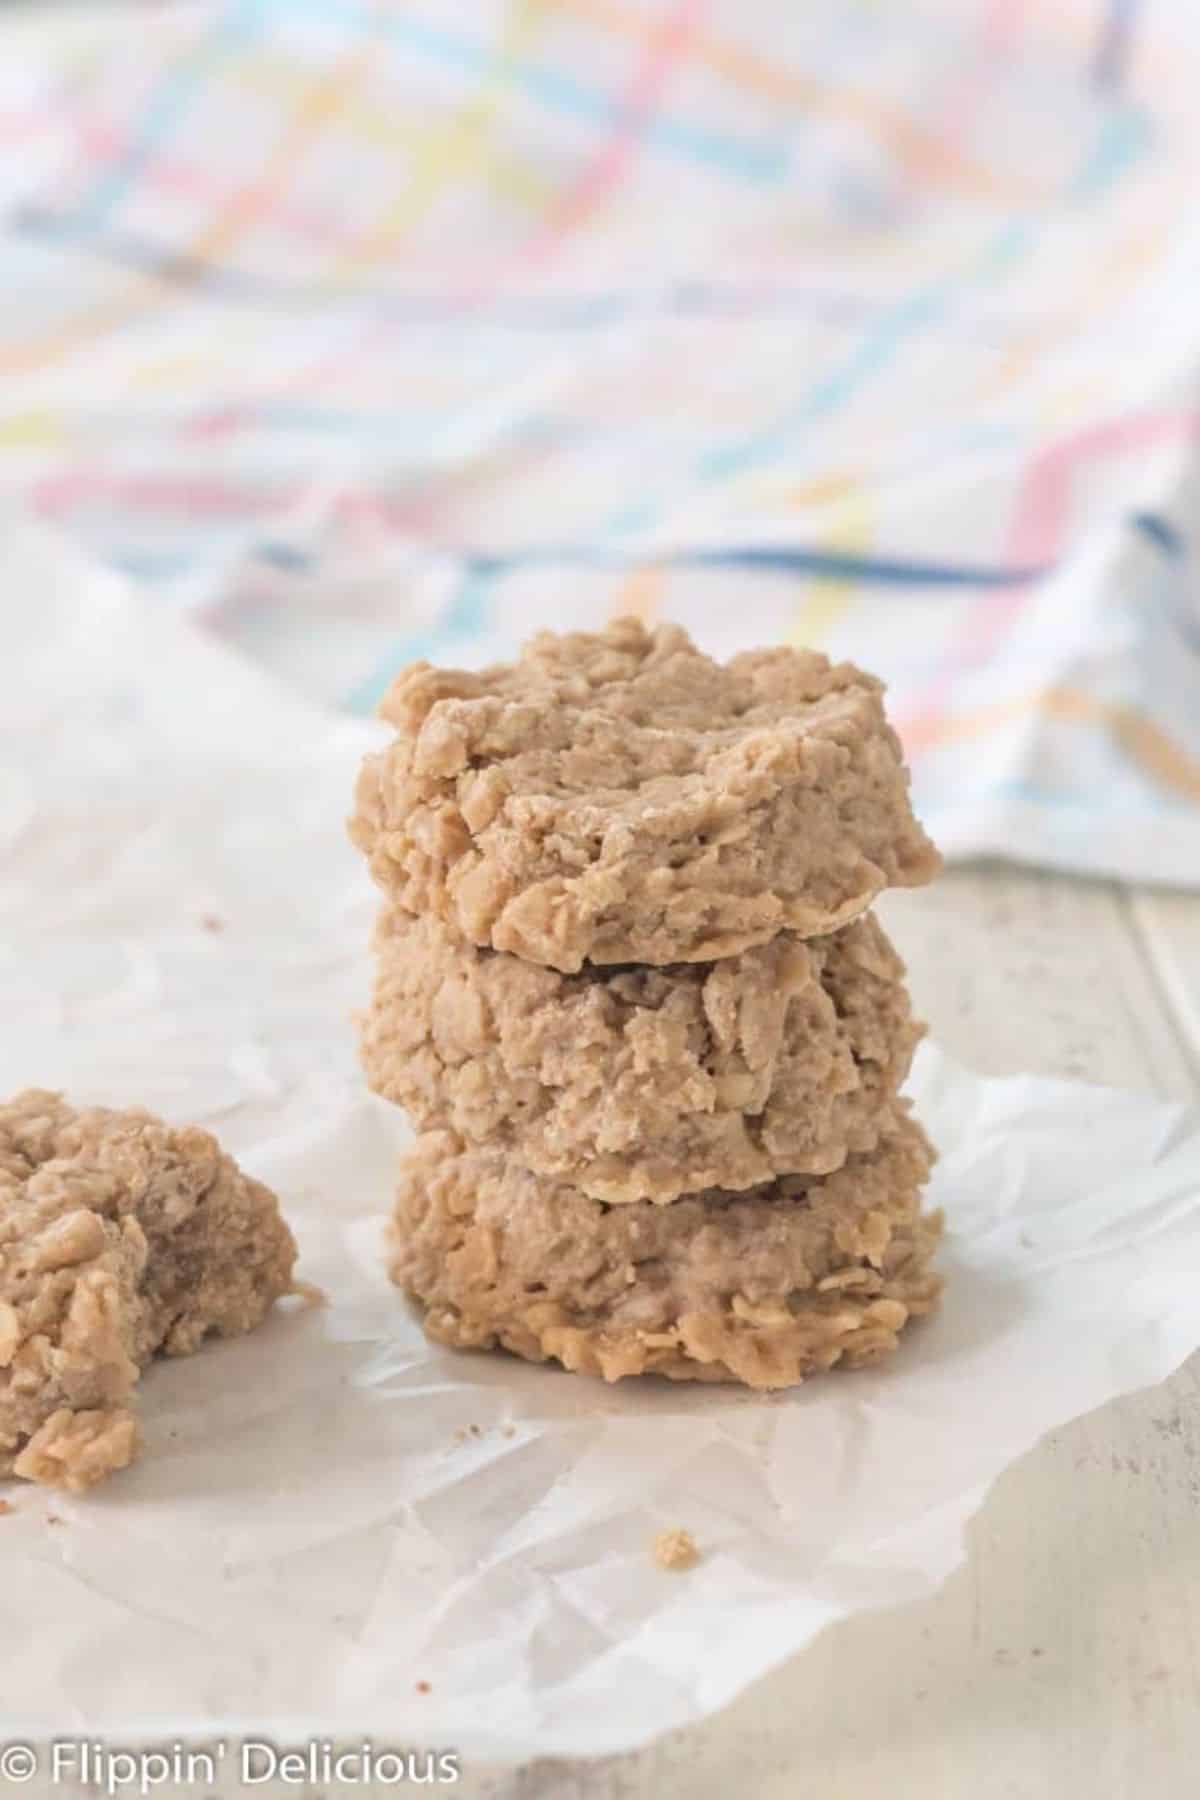 A pile of deliicous No Bake Cookies.